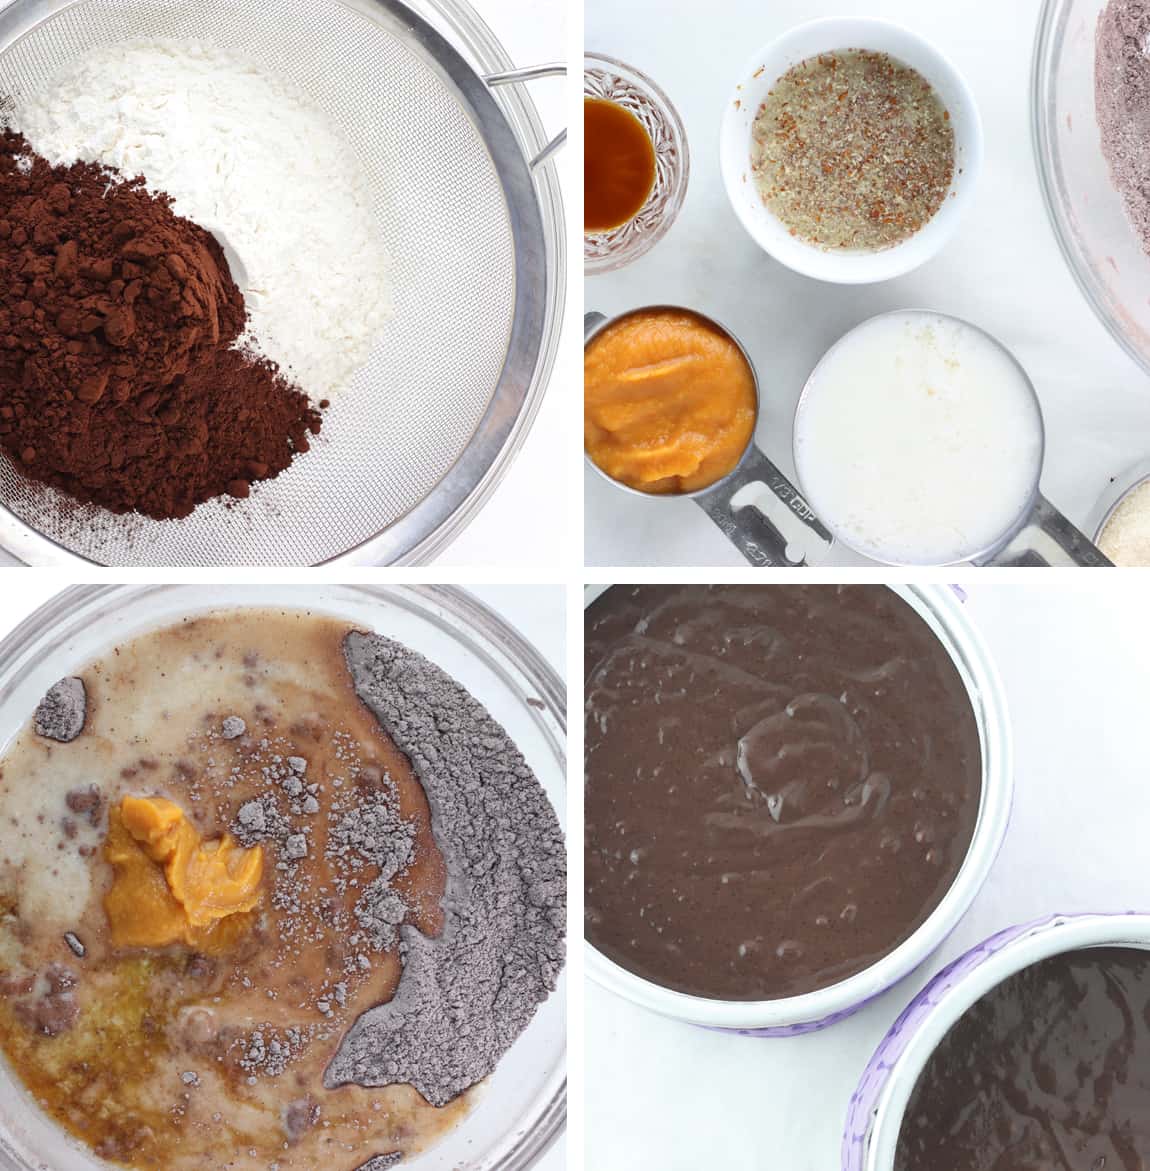 Dairy free cake ingredients and steps.